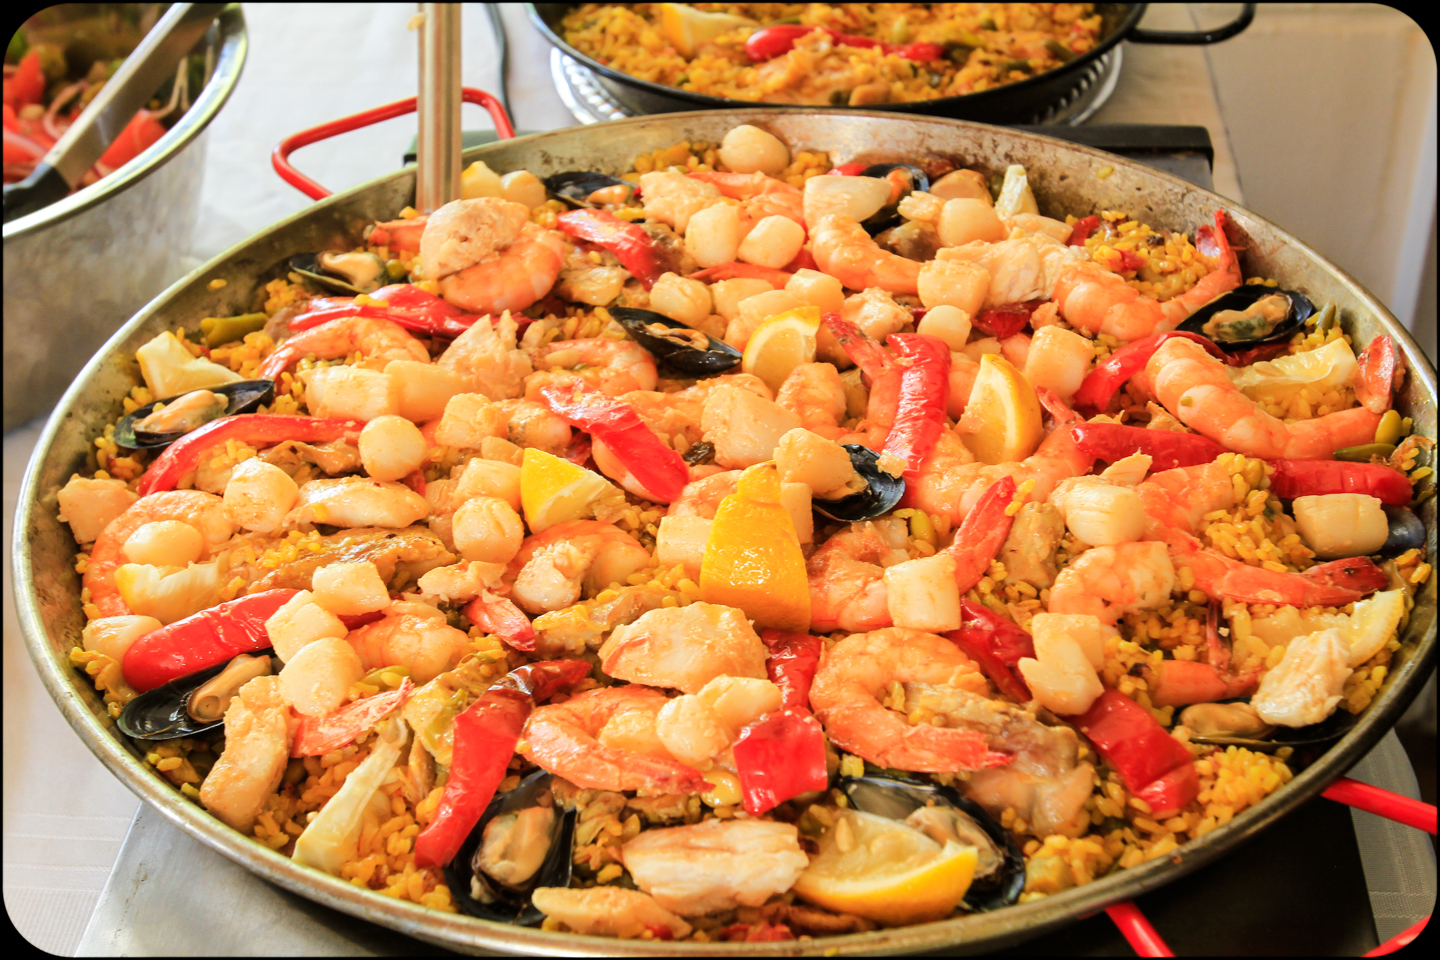 Tallahassee's Real Paella Offers Authentic Spanish Cuisine - Real ...